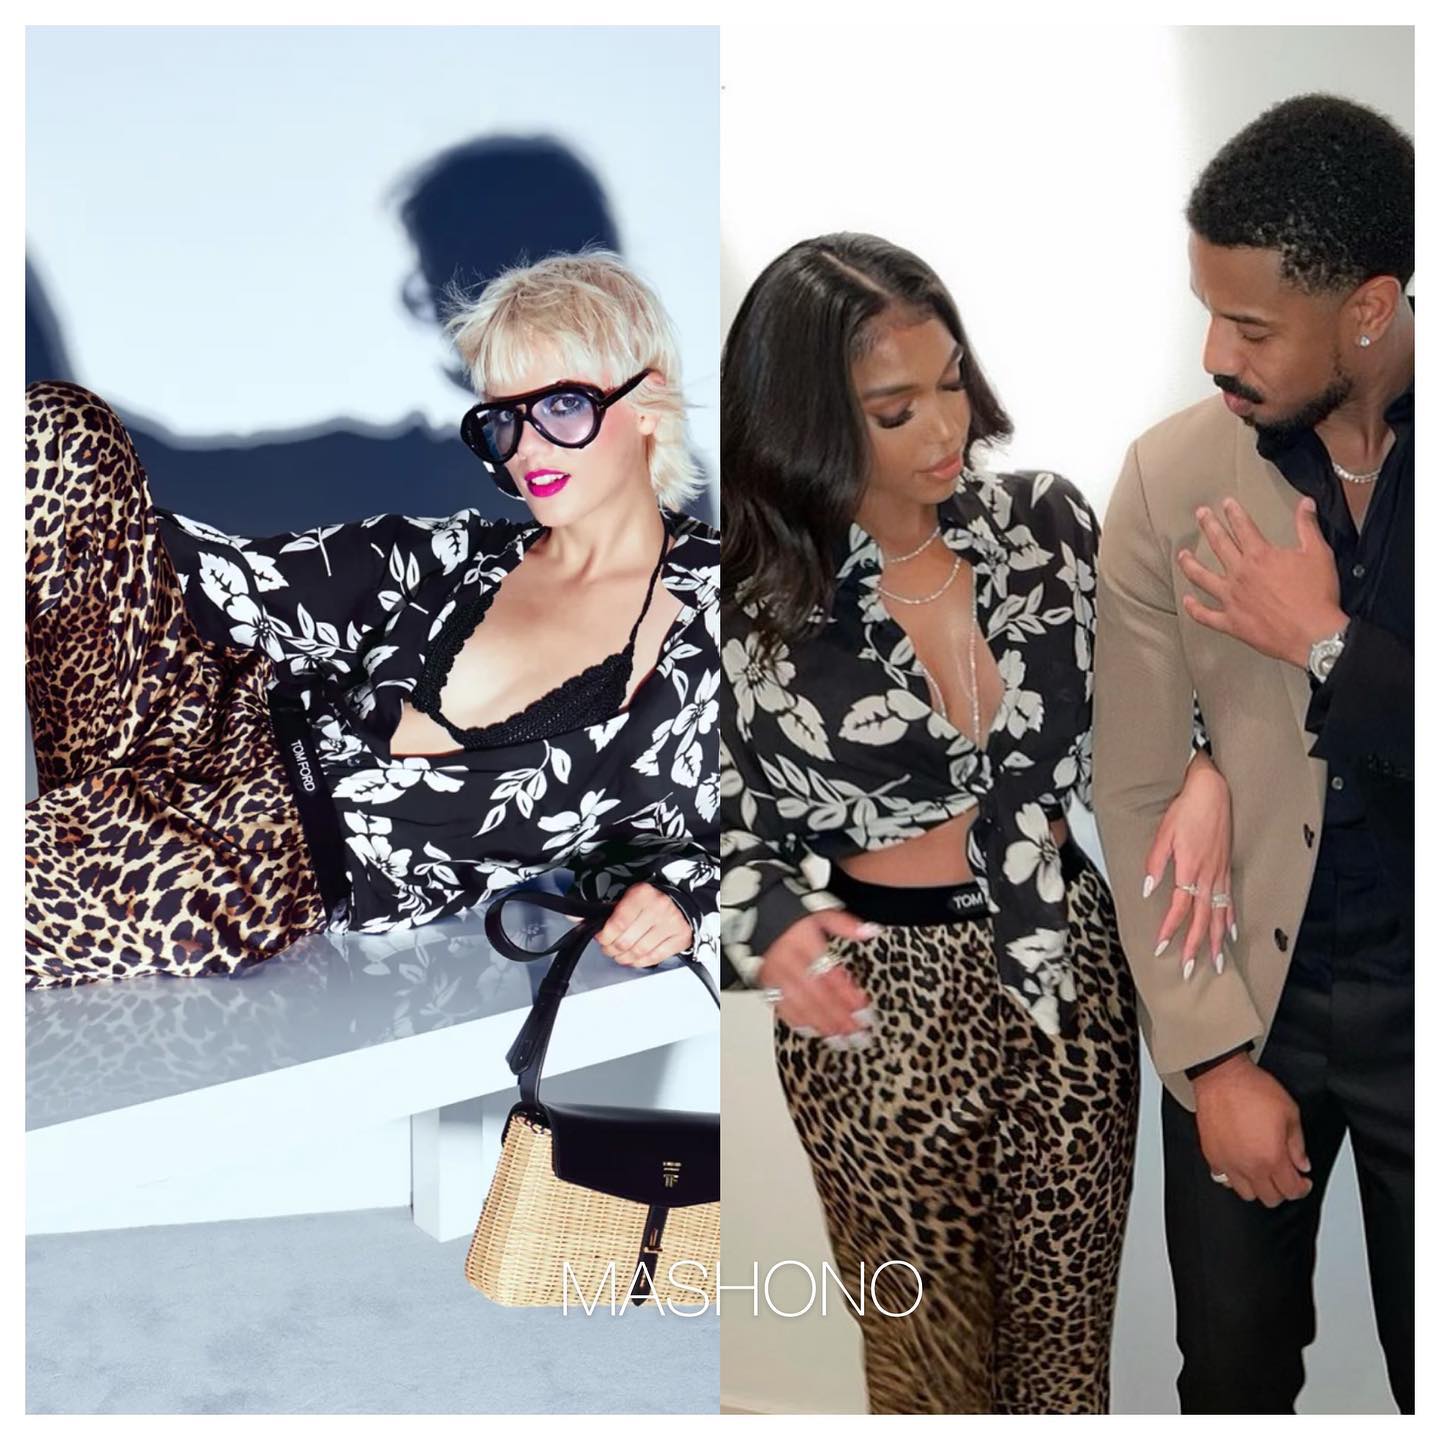 When they match each other’s fly#loriharvey looked chic in #tomford #michaelbjordan <span id=